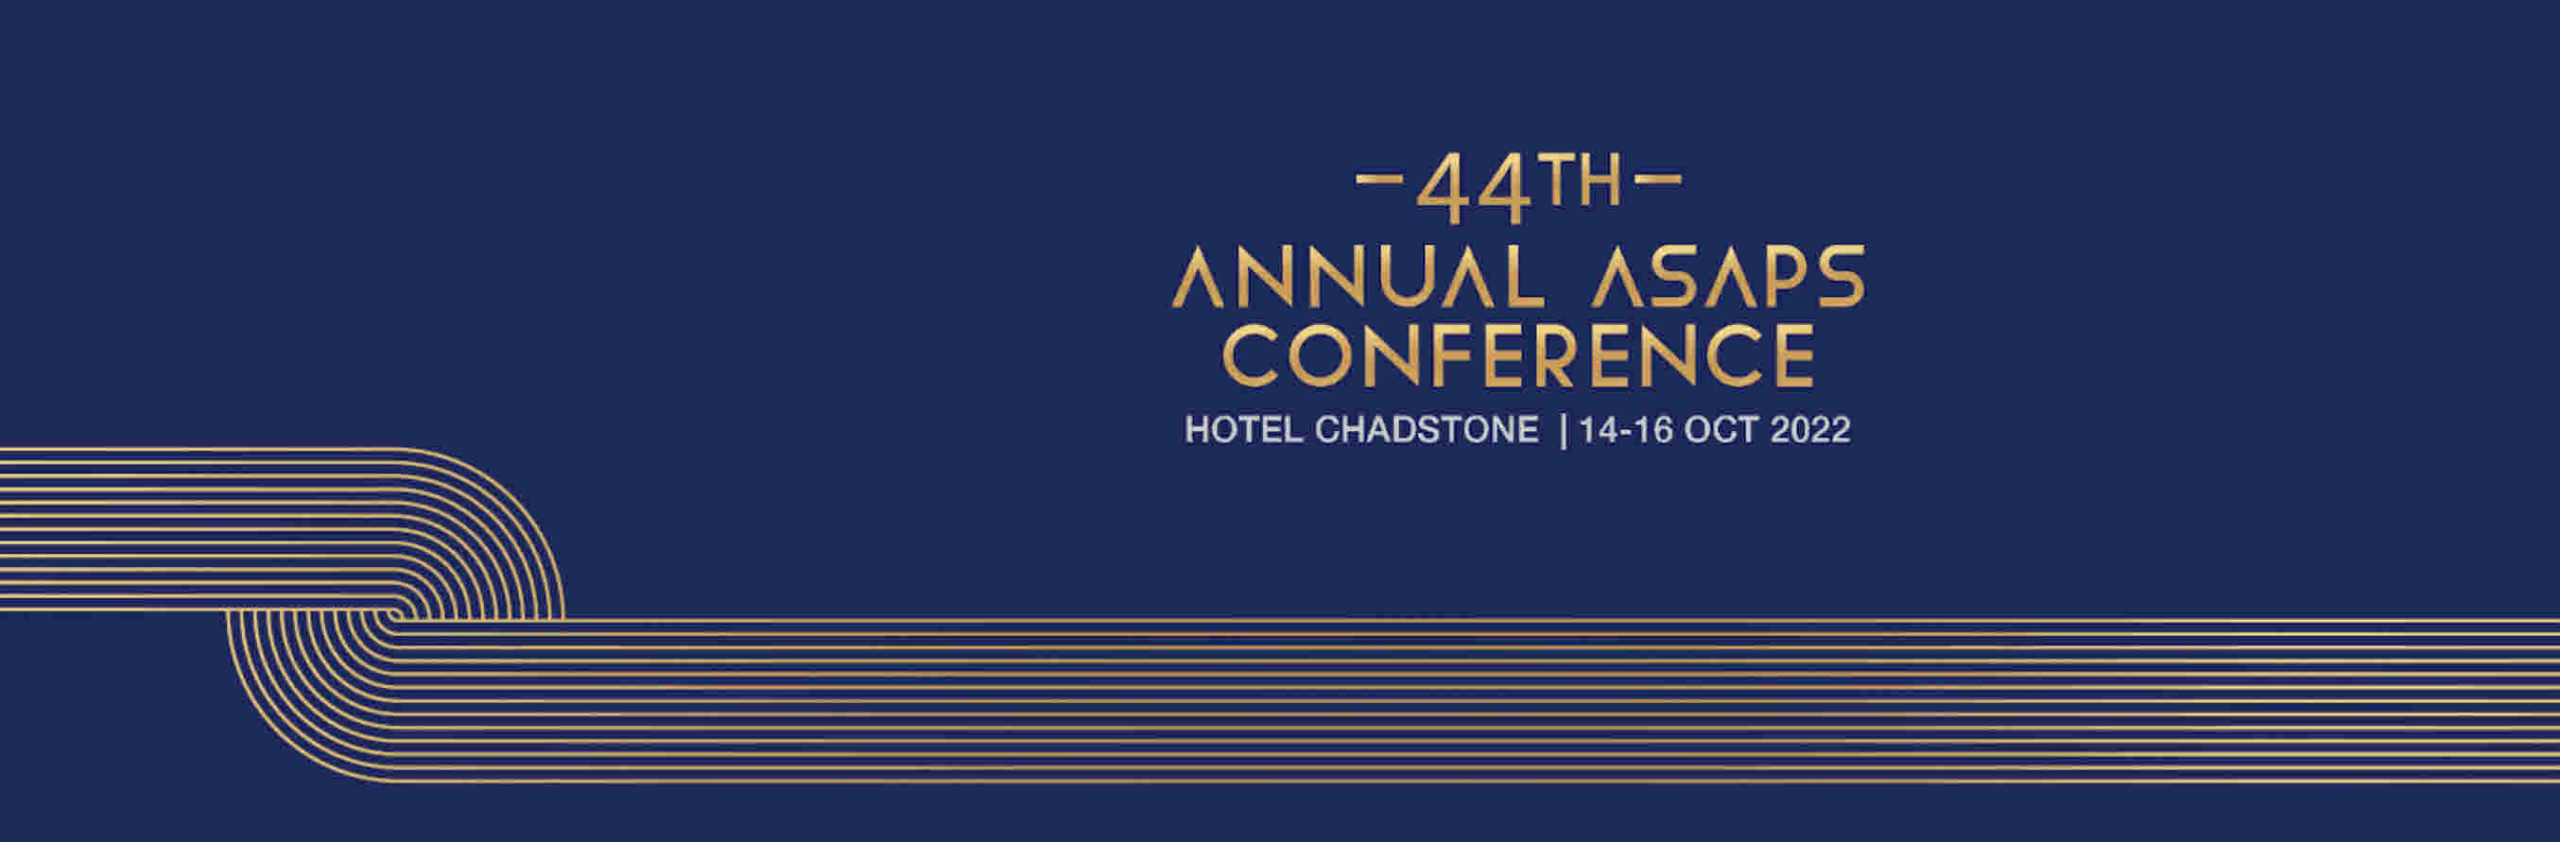 ASAPS Conference